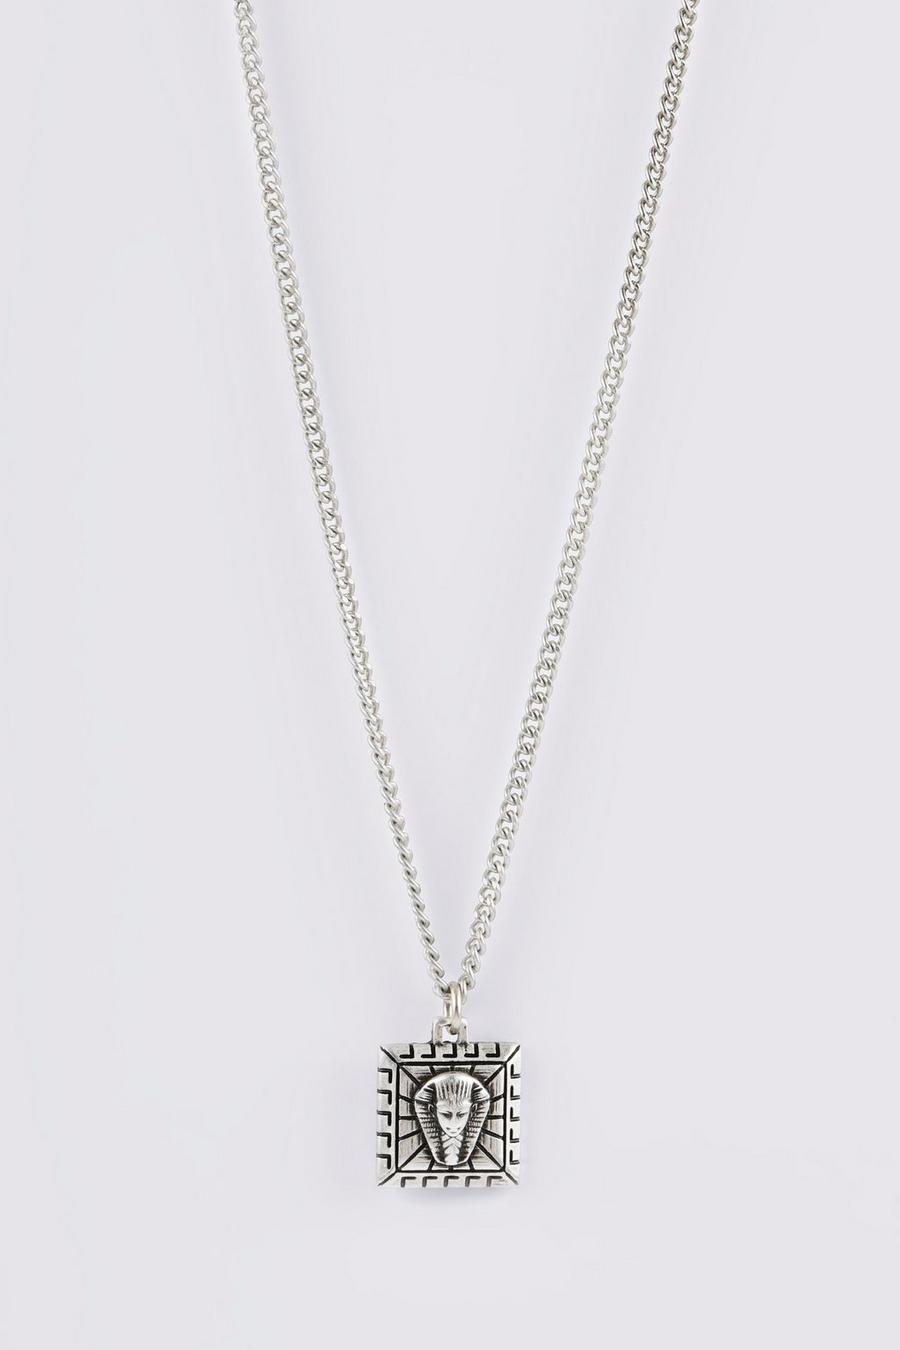 Silver argent Pharaoh Pendant Chain Necklace